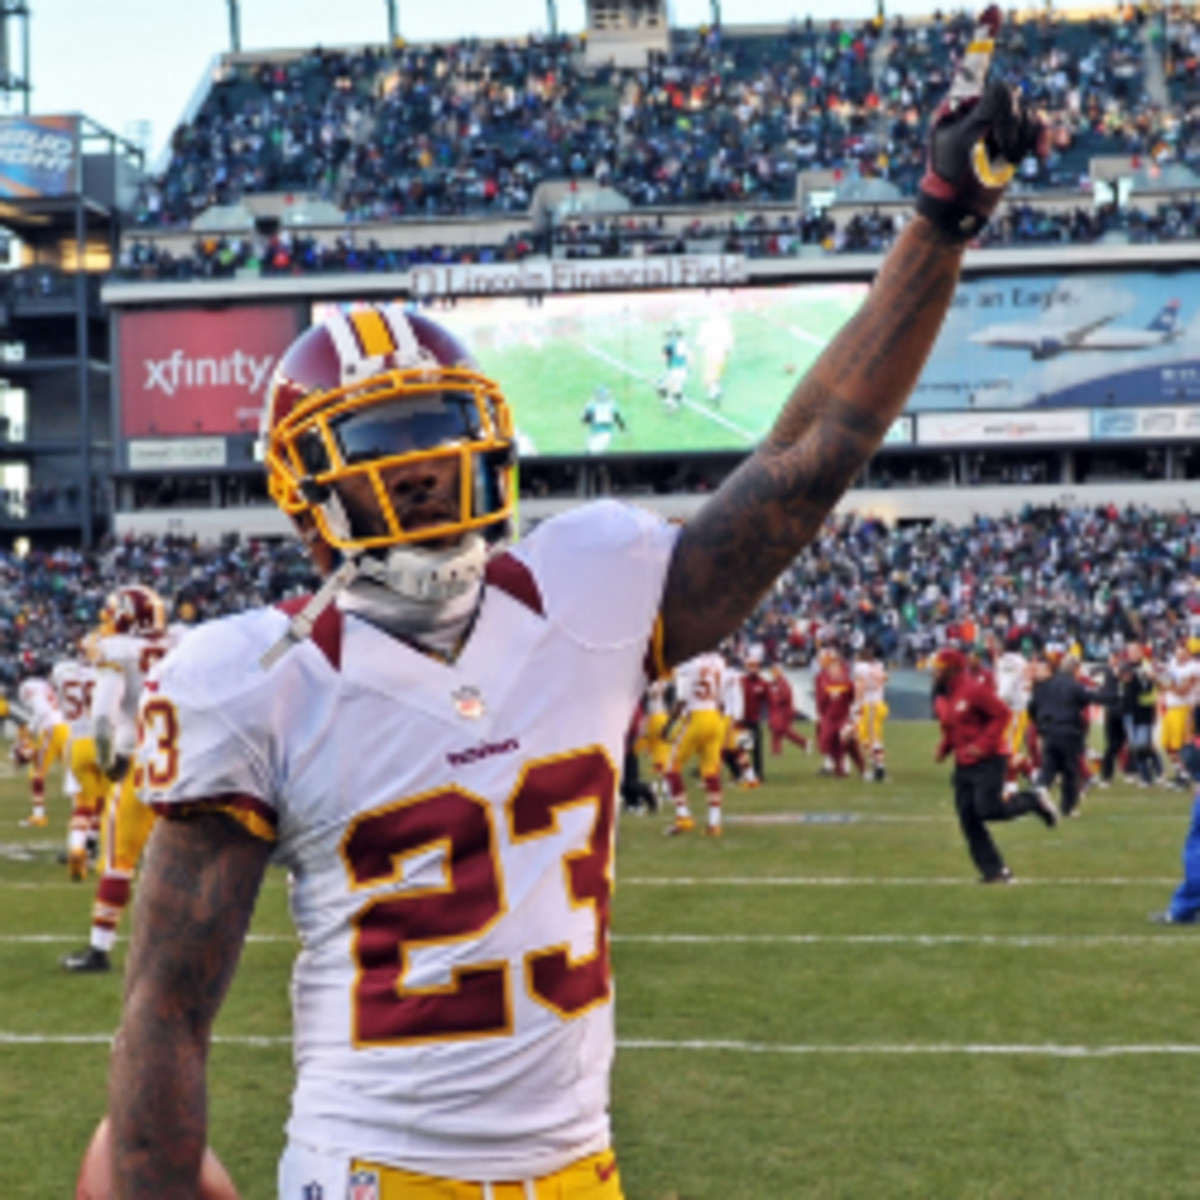 The Redskins are bringing back cornerback DeAngelo Hall, who agreed to a one-year contract. (Drew Hallowell/Getty Images)